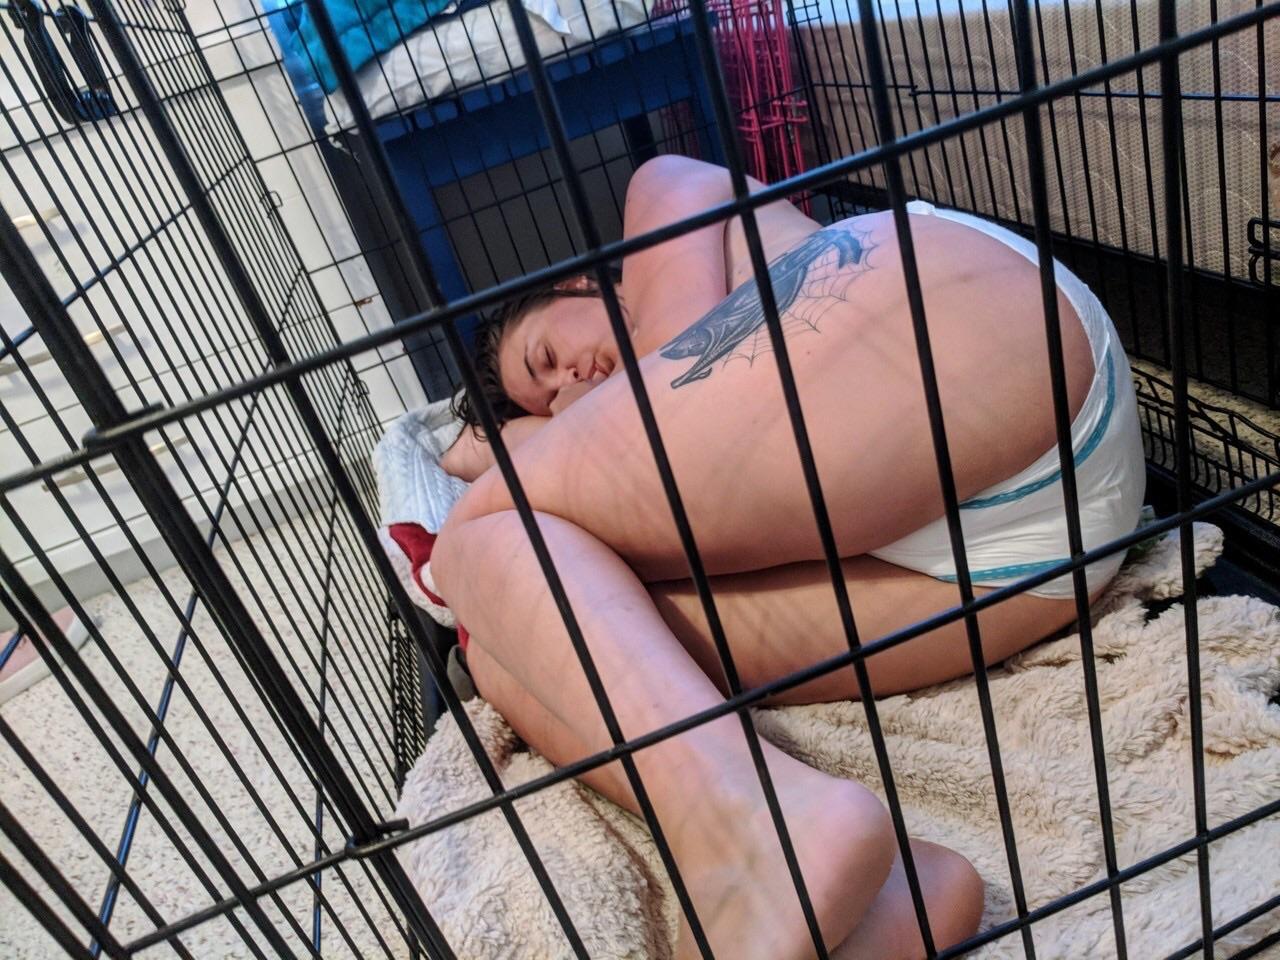 Caged and diapered